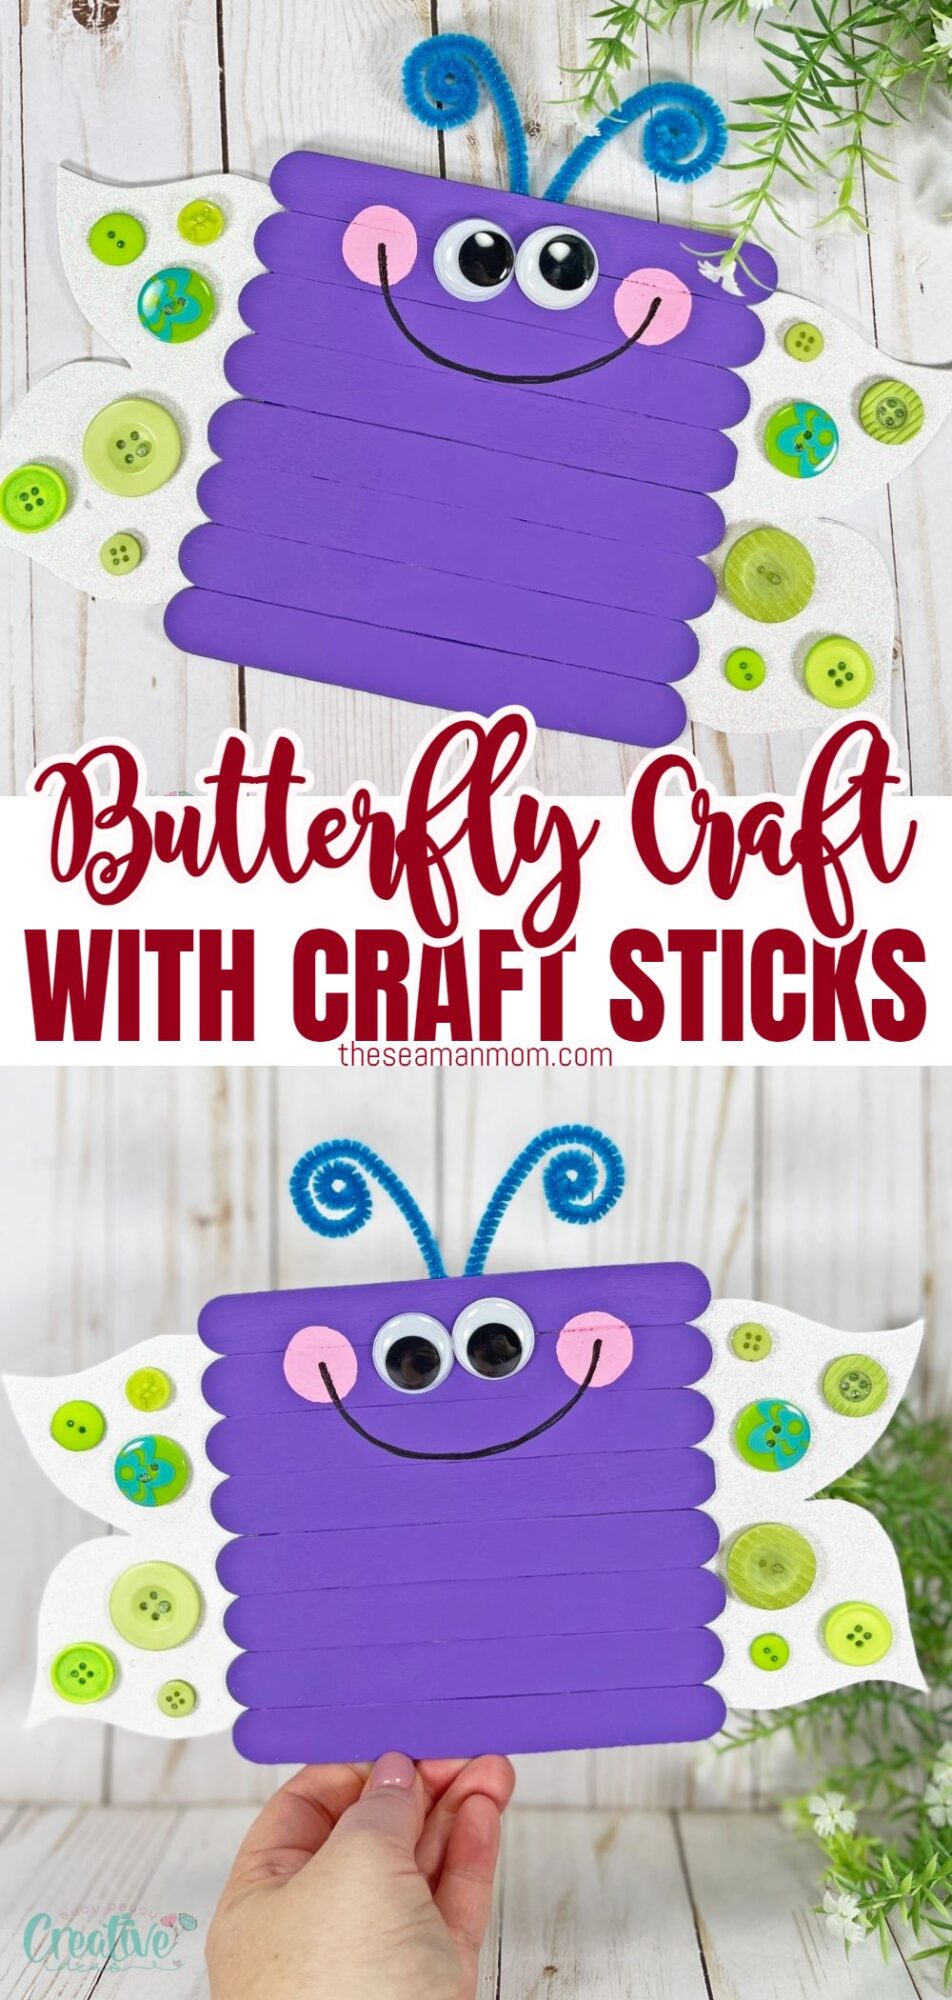 A vibrant butterfly craft project that unleashes your creativity and adds color to your living space. Perfect for DIY enthusiasts or beginners! Let your imagination take flight with this easy and adorable craft project. Get ready to soar!